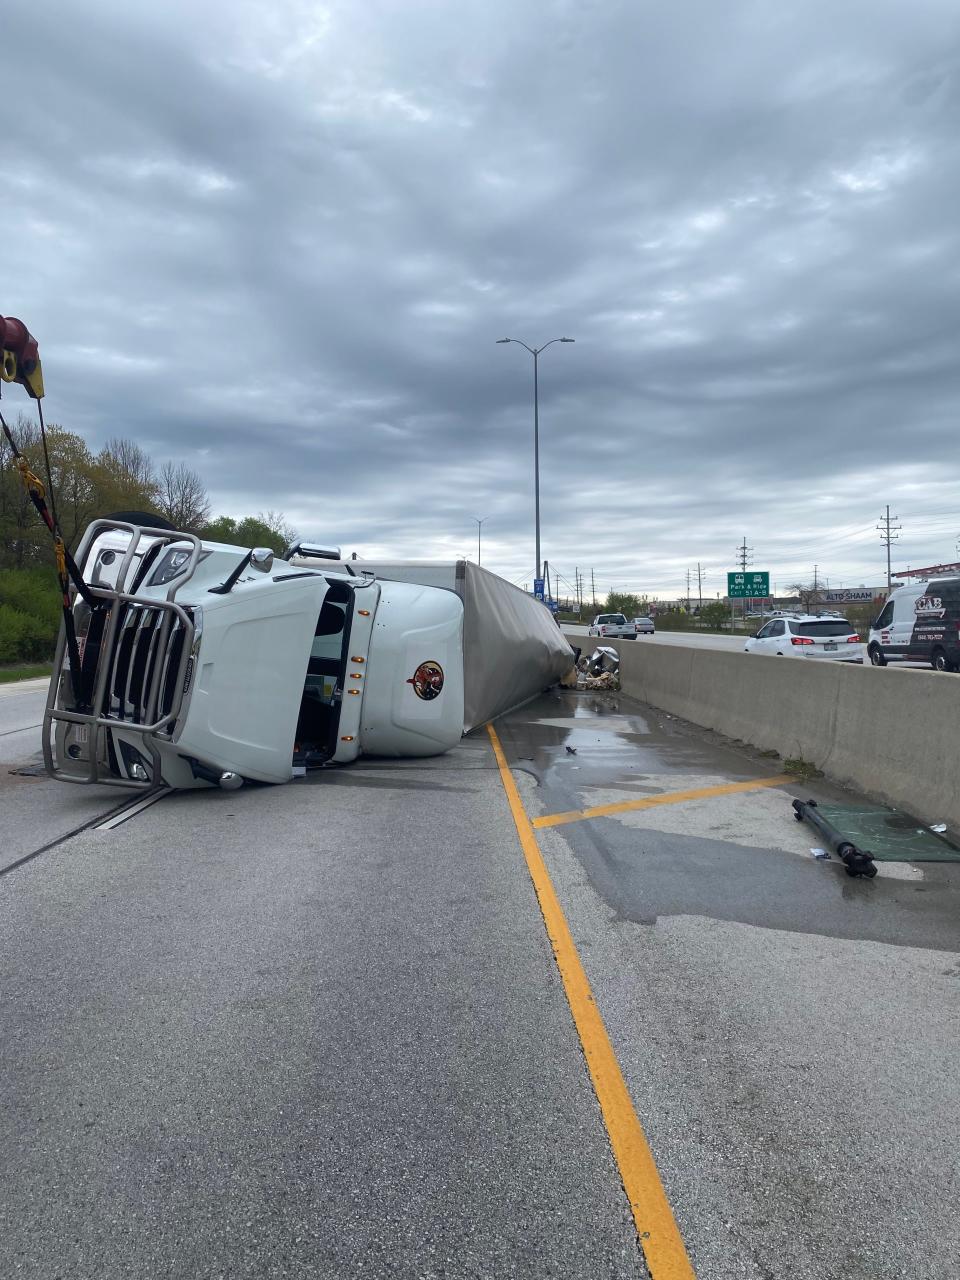 A truck overturned after colliding with another vehicle on northbound Interstate 41 in Menomonee Falls on Thursday, May 2, closing two lanes of traffic for about six hours.